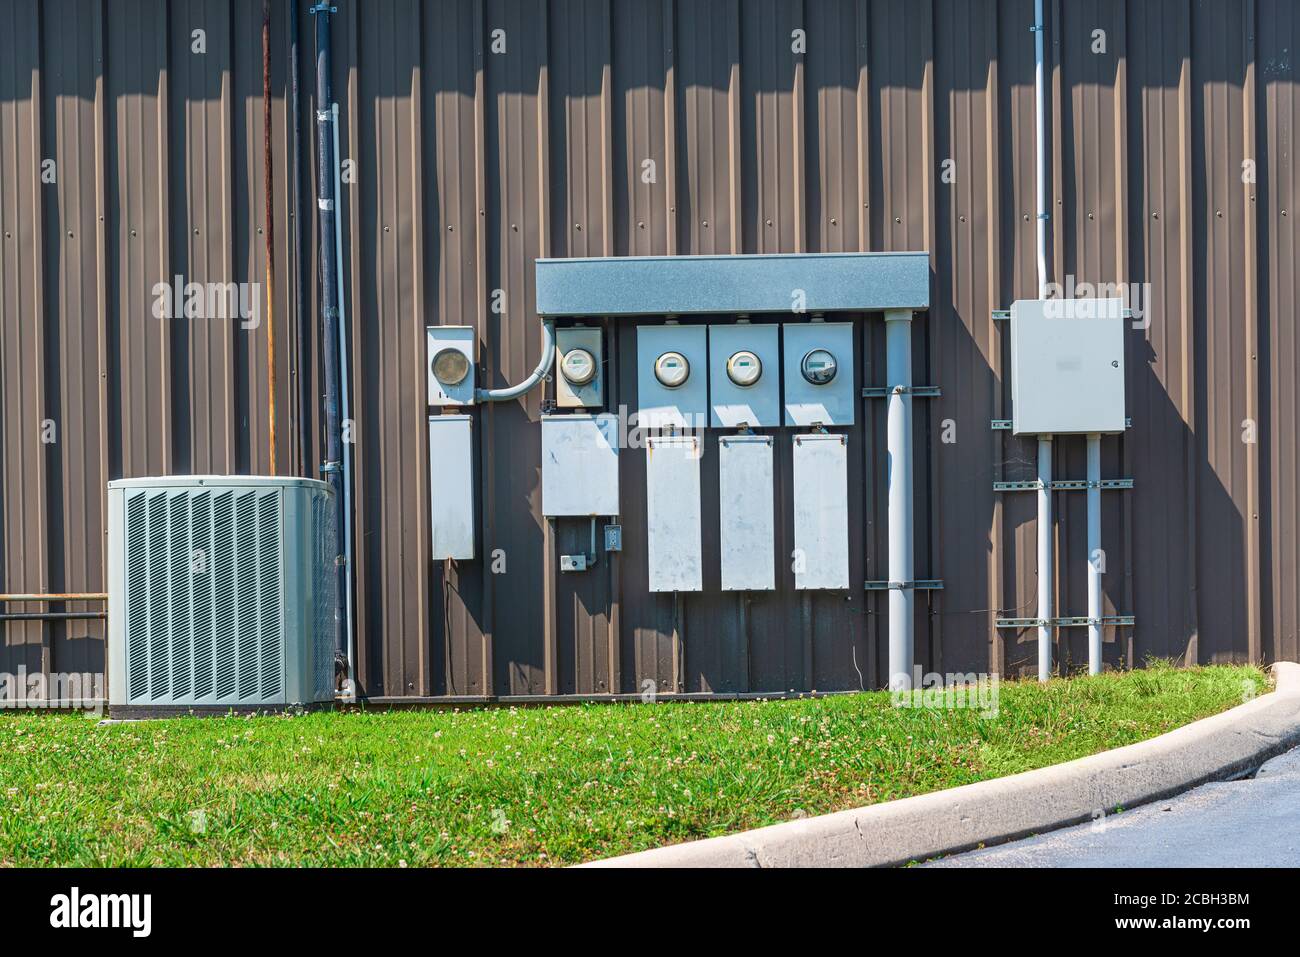 Horizontal shot of an air conditioner and electric meters outside of an office complex. Stock Photo